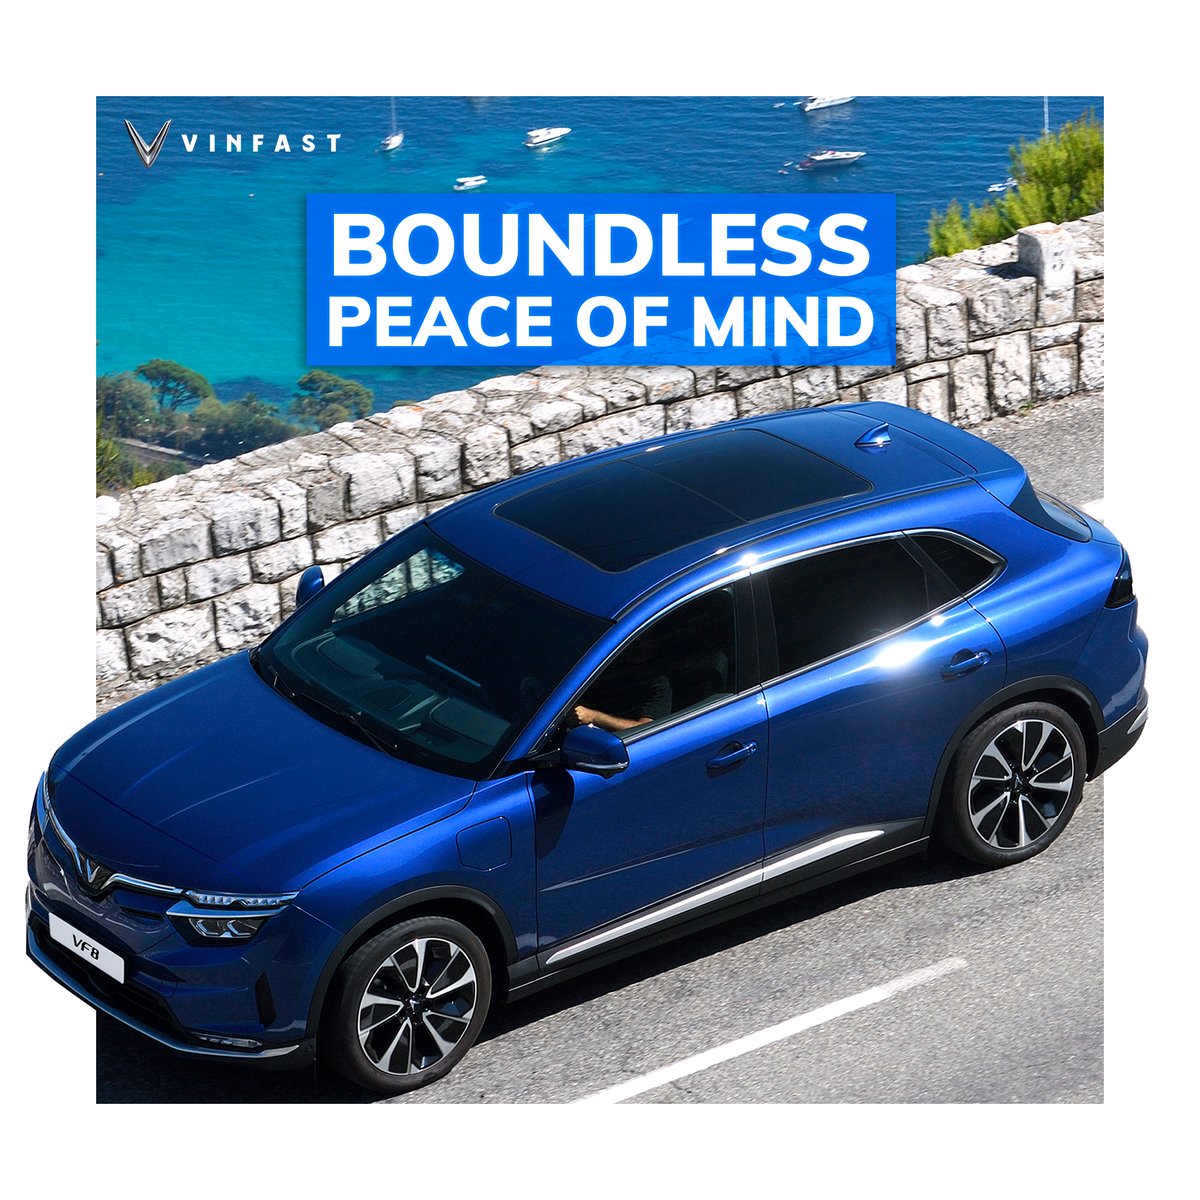 VinFast’s extensive 10-year/200.000 km* 'bumper to bumper' warranty includes the battery, making it one of the most extended in the industry *Find out more and see conditions: vinfastauto.eu/en/service #VinFastEurope #VinFast #EV #BoundlessTogether #JoinTheCharge